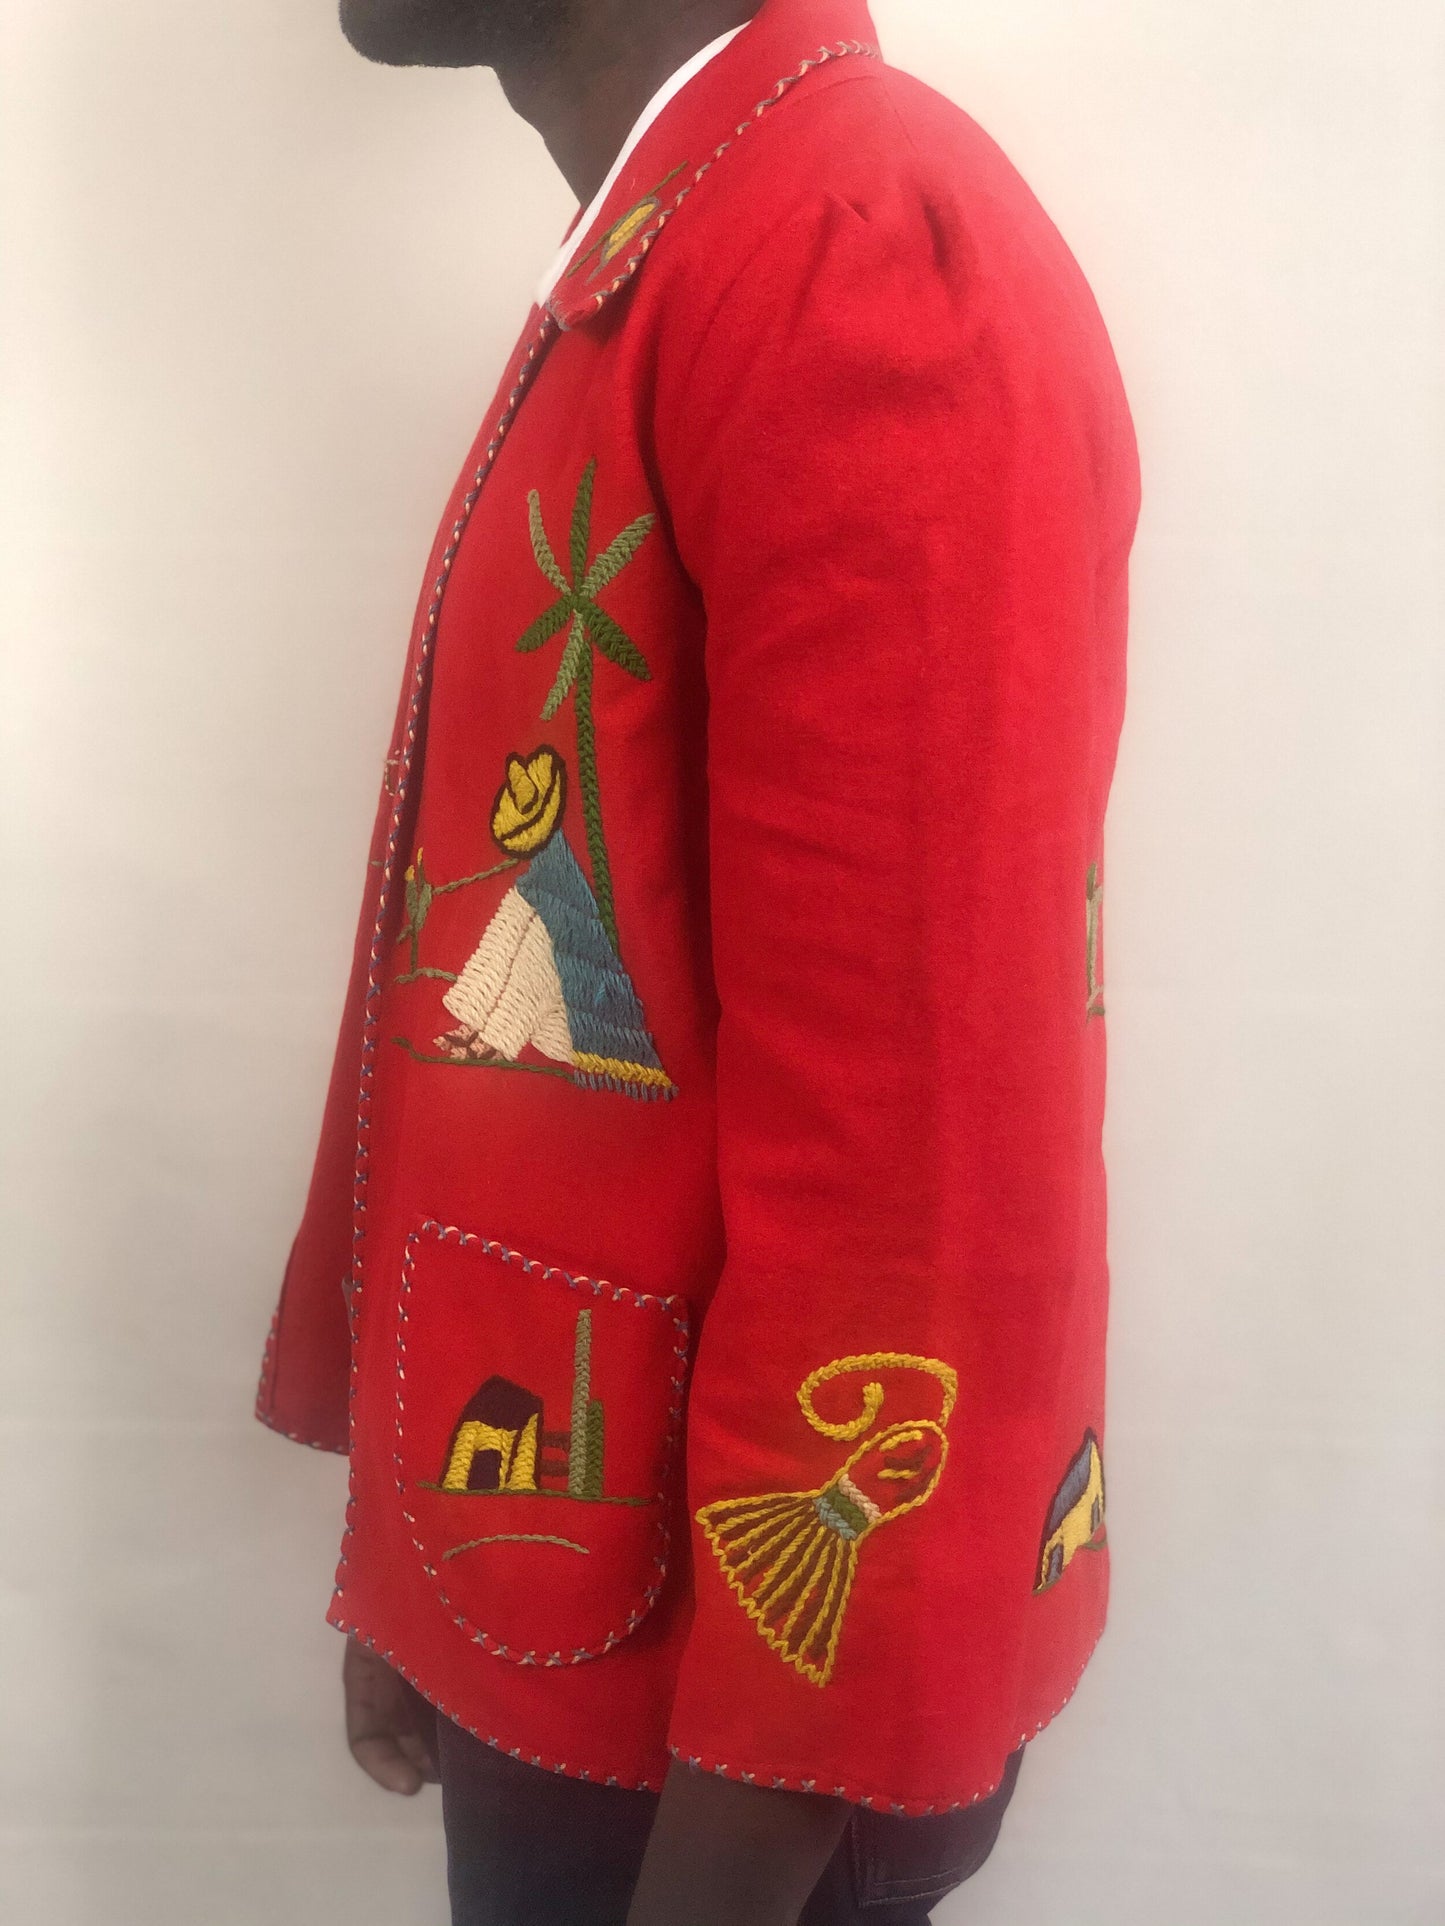 VINTAGE 1950s MEXICAN EMBROIDERED JACKET